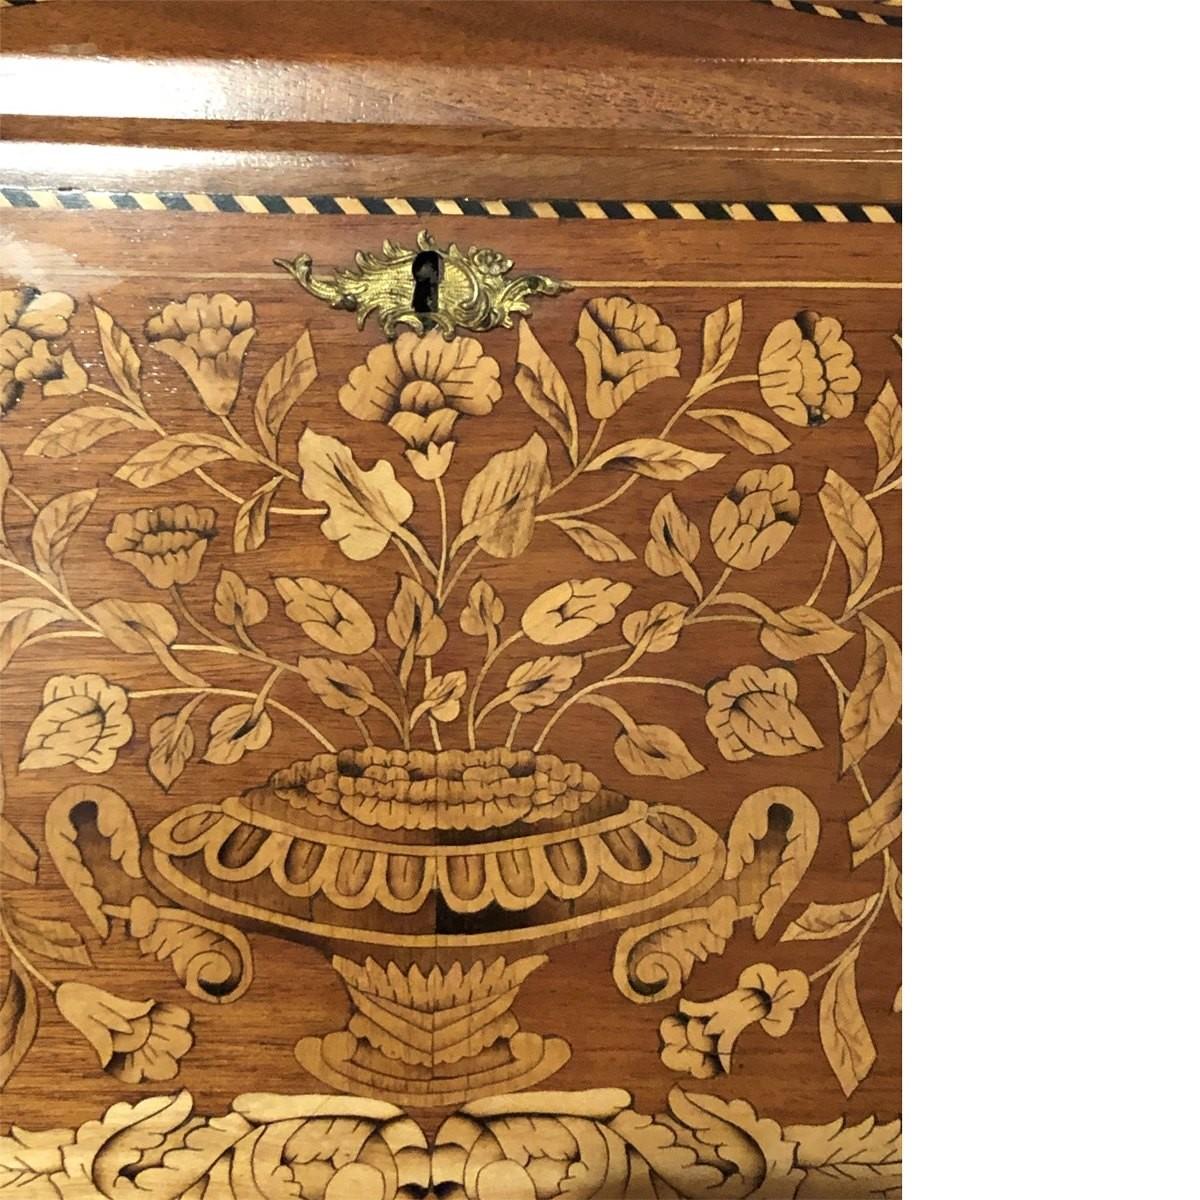 Inlaid Desk Early 20th Century In Excellent Condition For Sale In Pasadena, CA